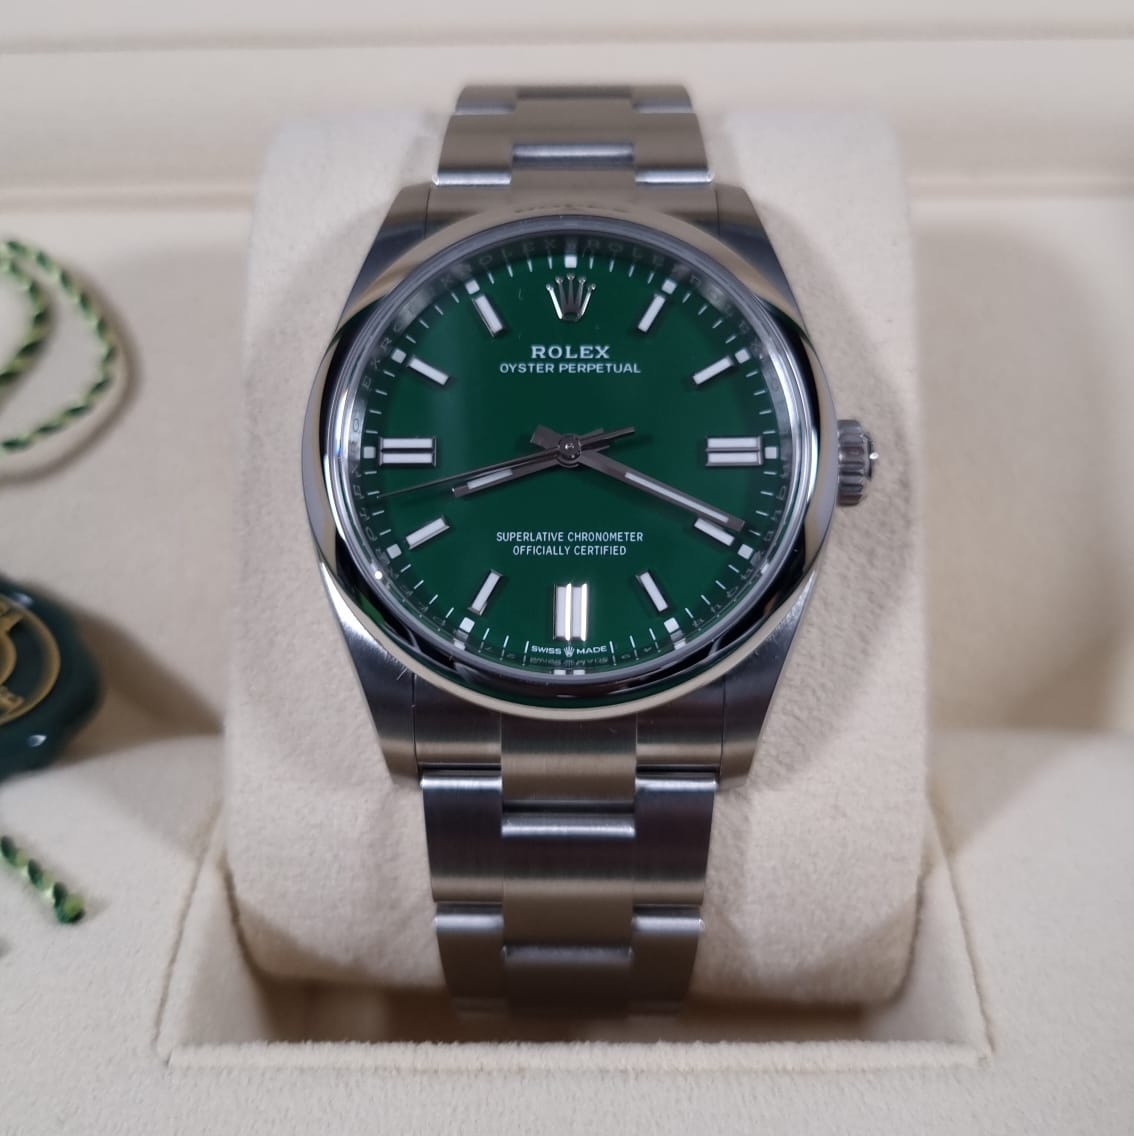 ROLEX “OYSTER PERPETUAL” 126000